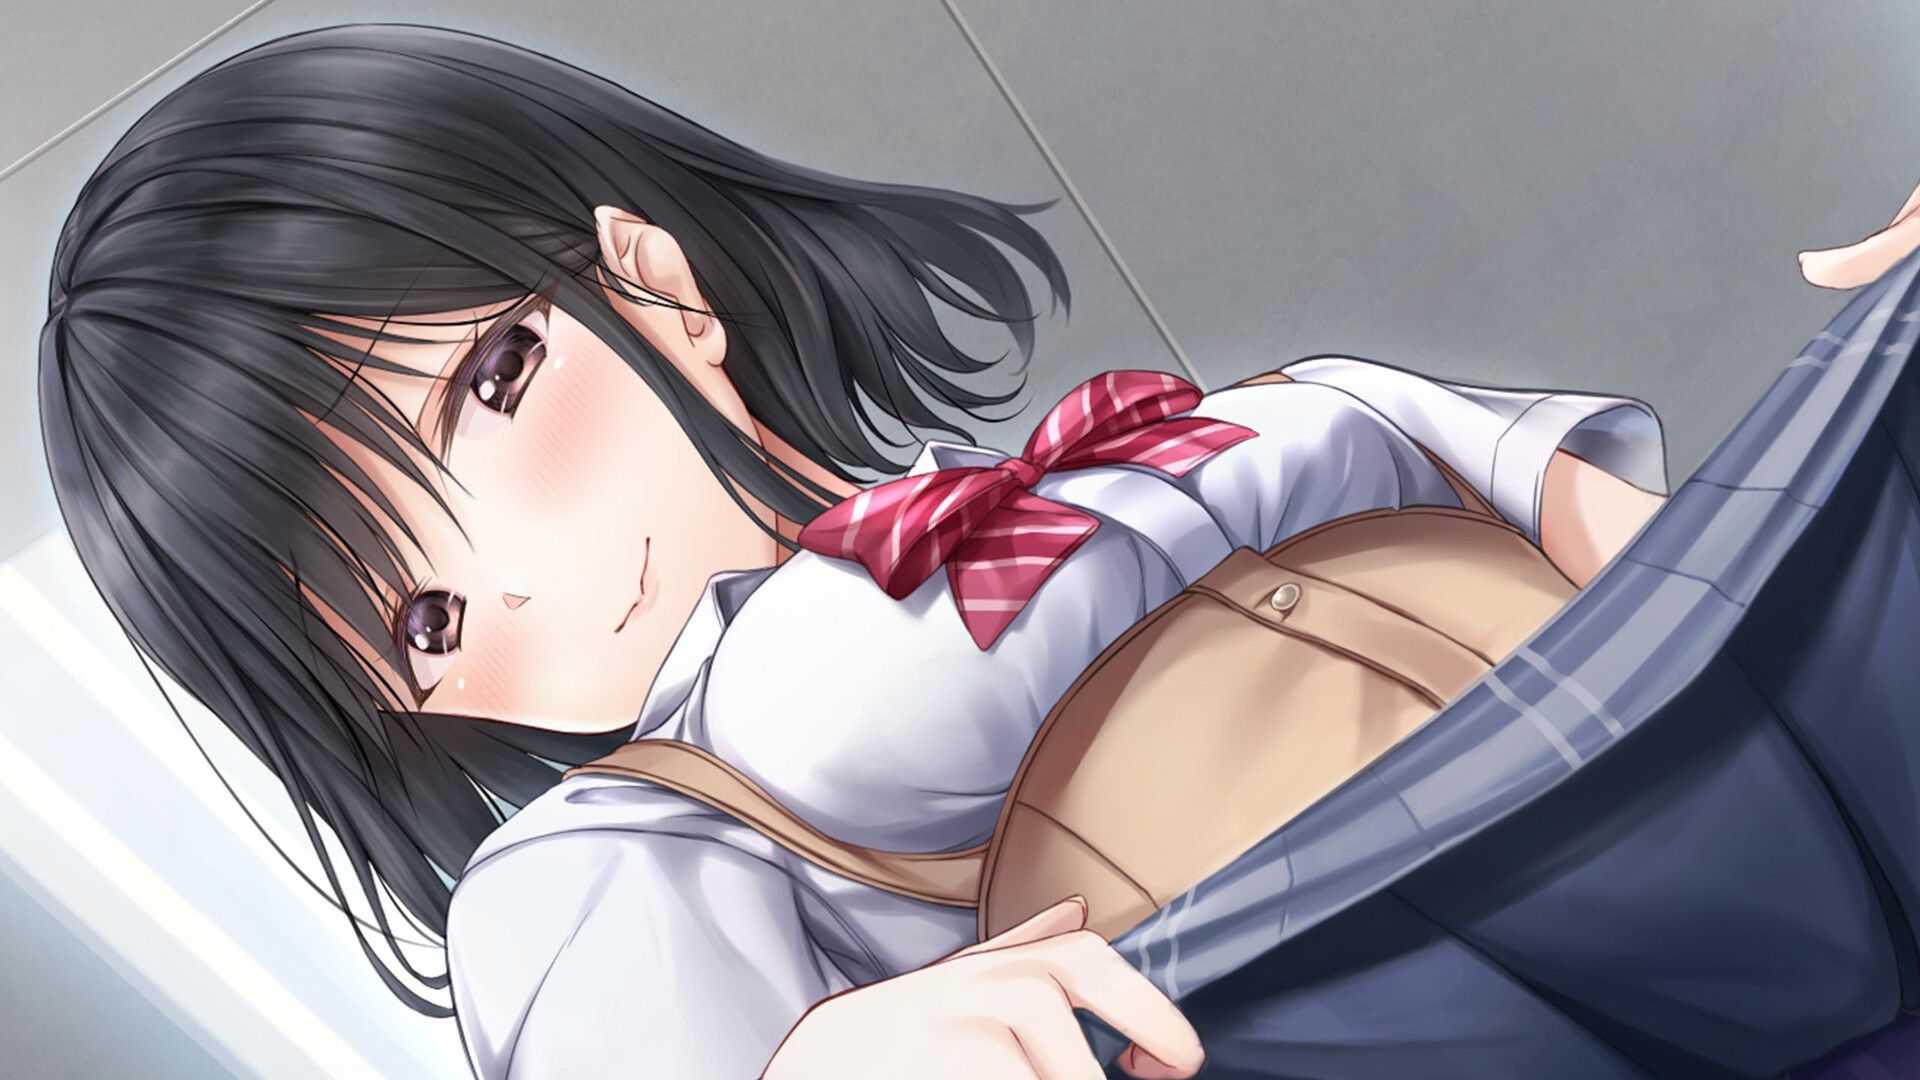 PS4 / switch version [Aikis 2] erotic event CG such as girl's skirt raise and swimsuit 12